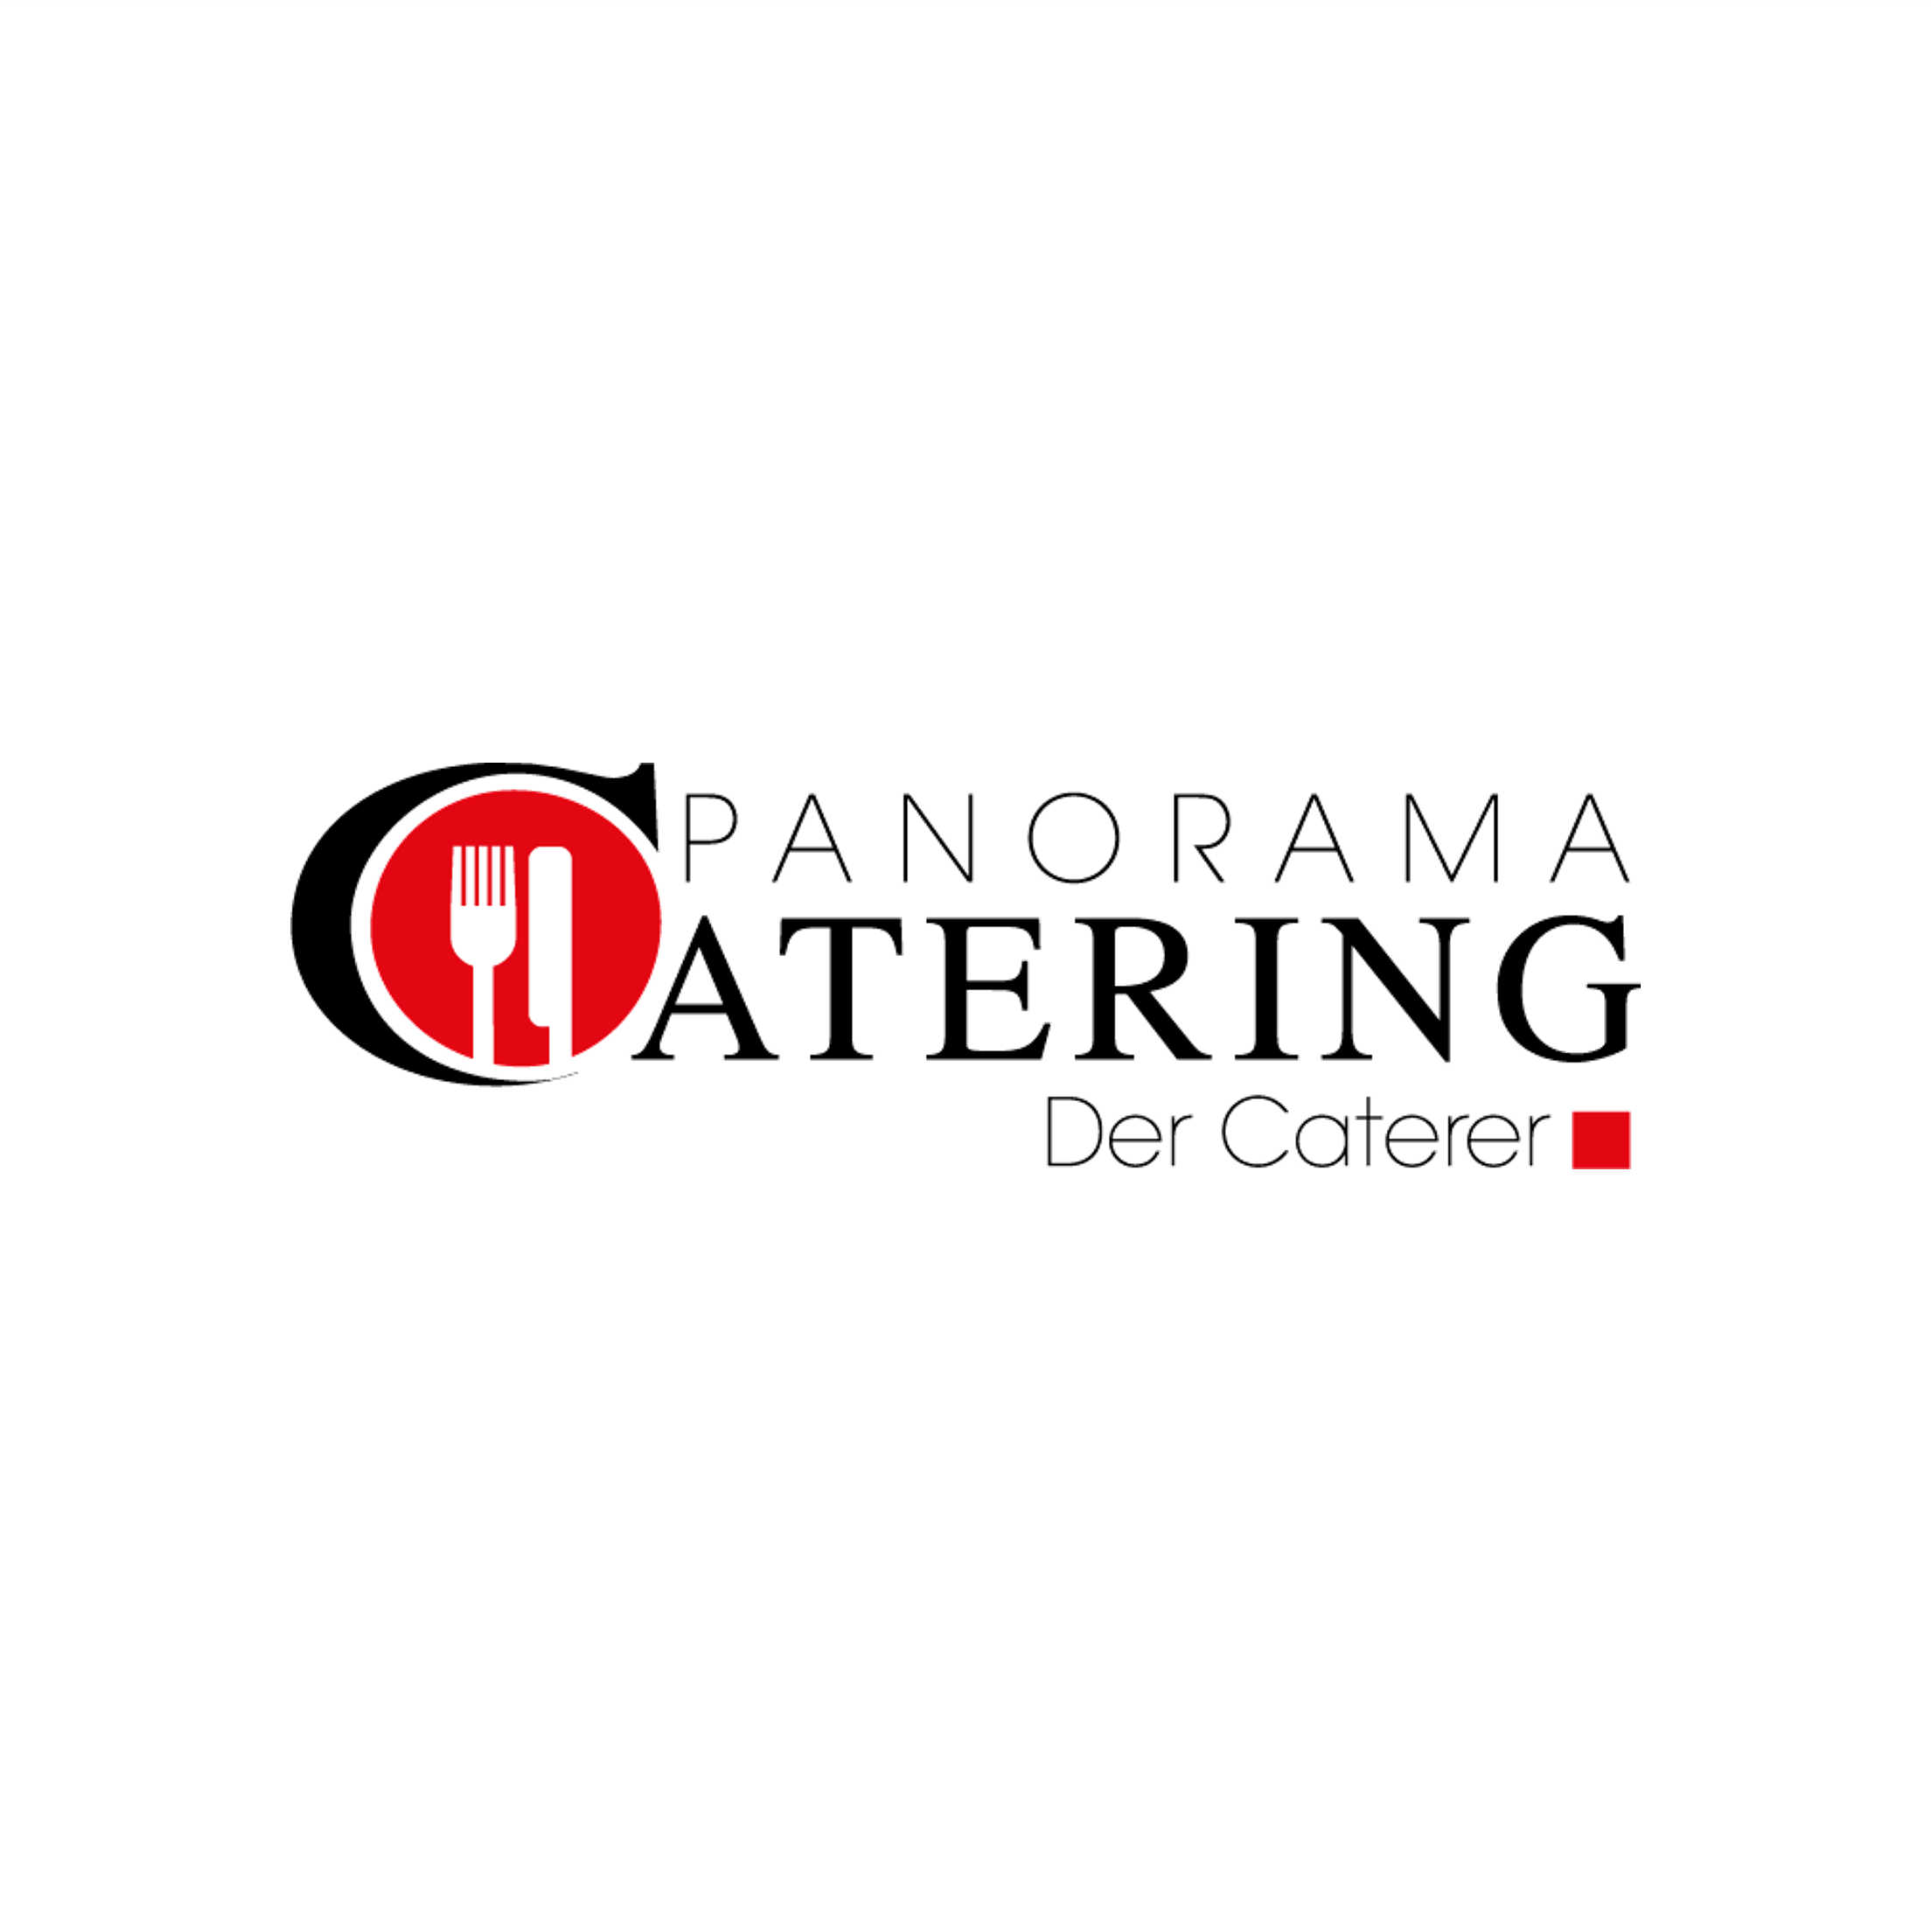 PanoramaCatering